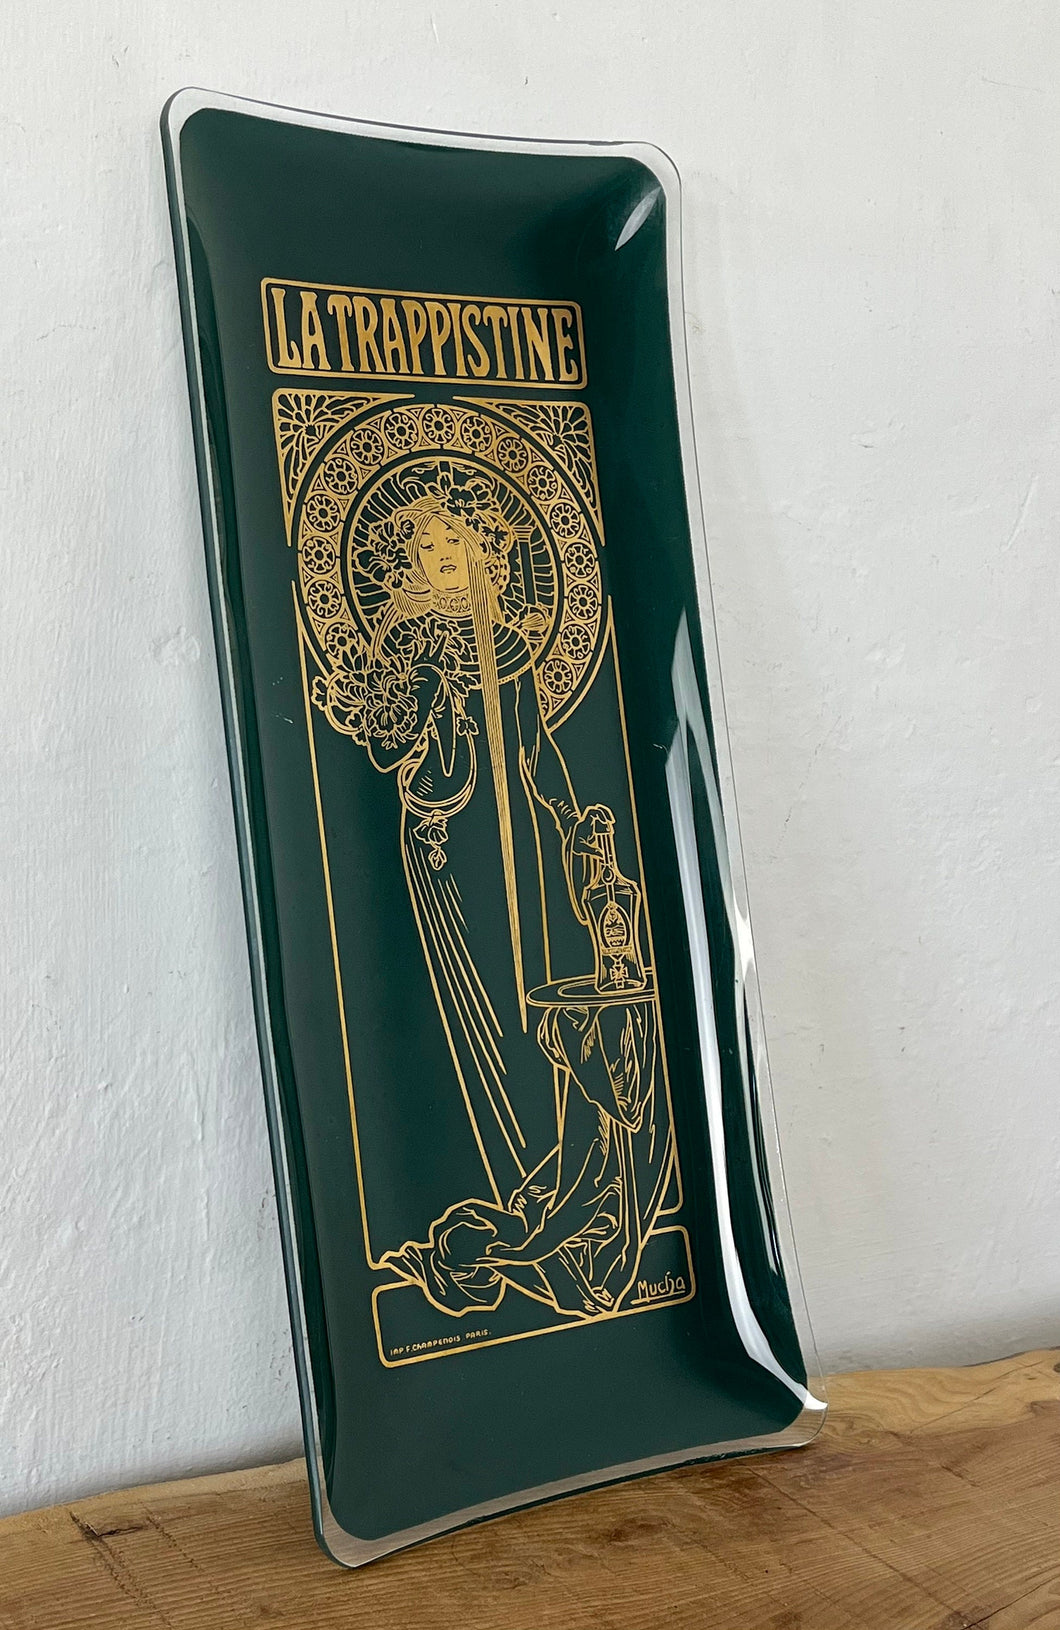 The picture shows a vintage glass tray with deep green background and Alphonse Mucha's painting La Trapisttine in gold. Depicts a young woman dressed in a religious habit with a calm and serene expression. One of her hands is on a bottle.